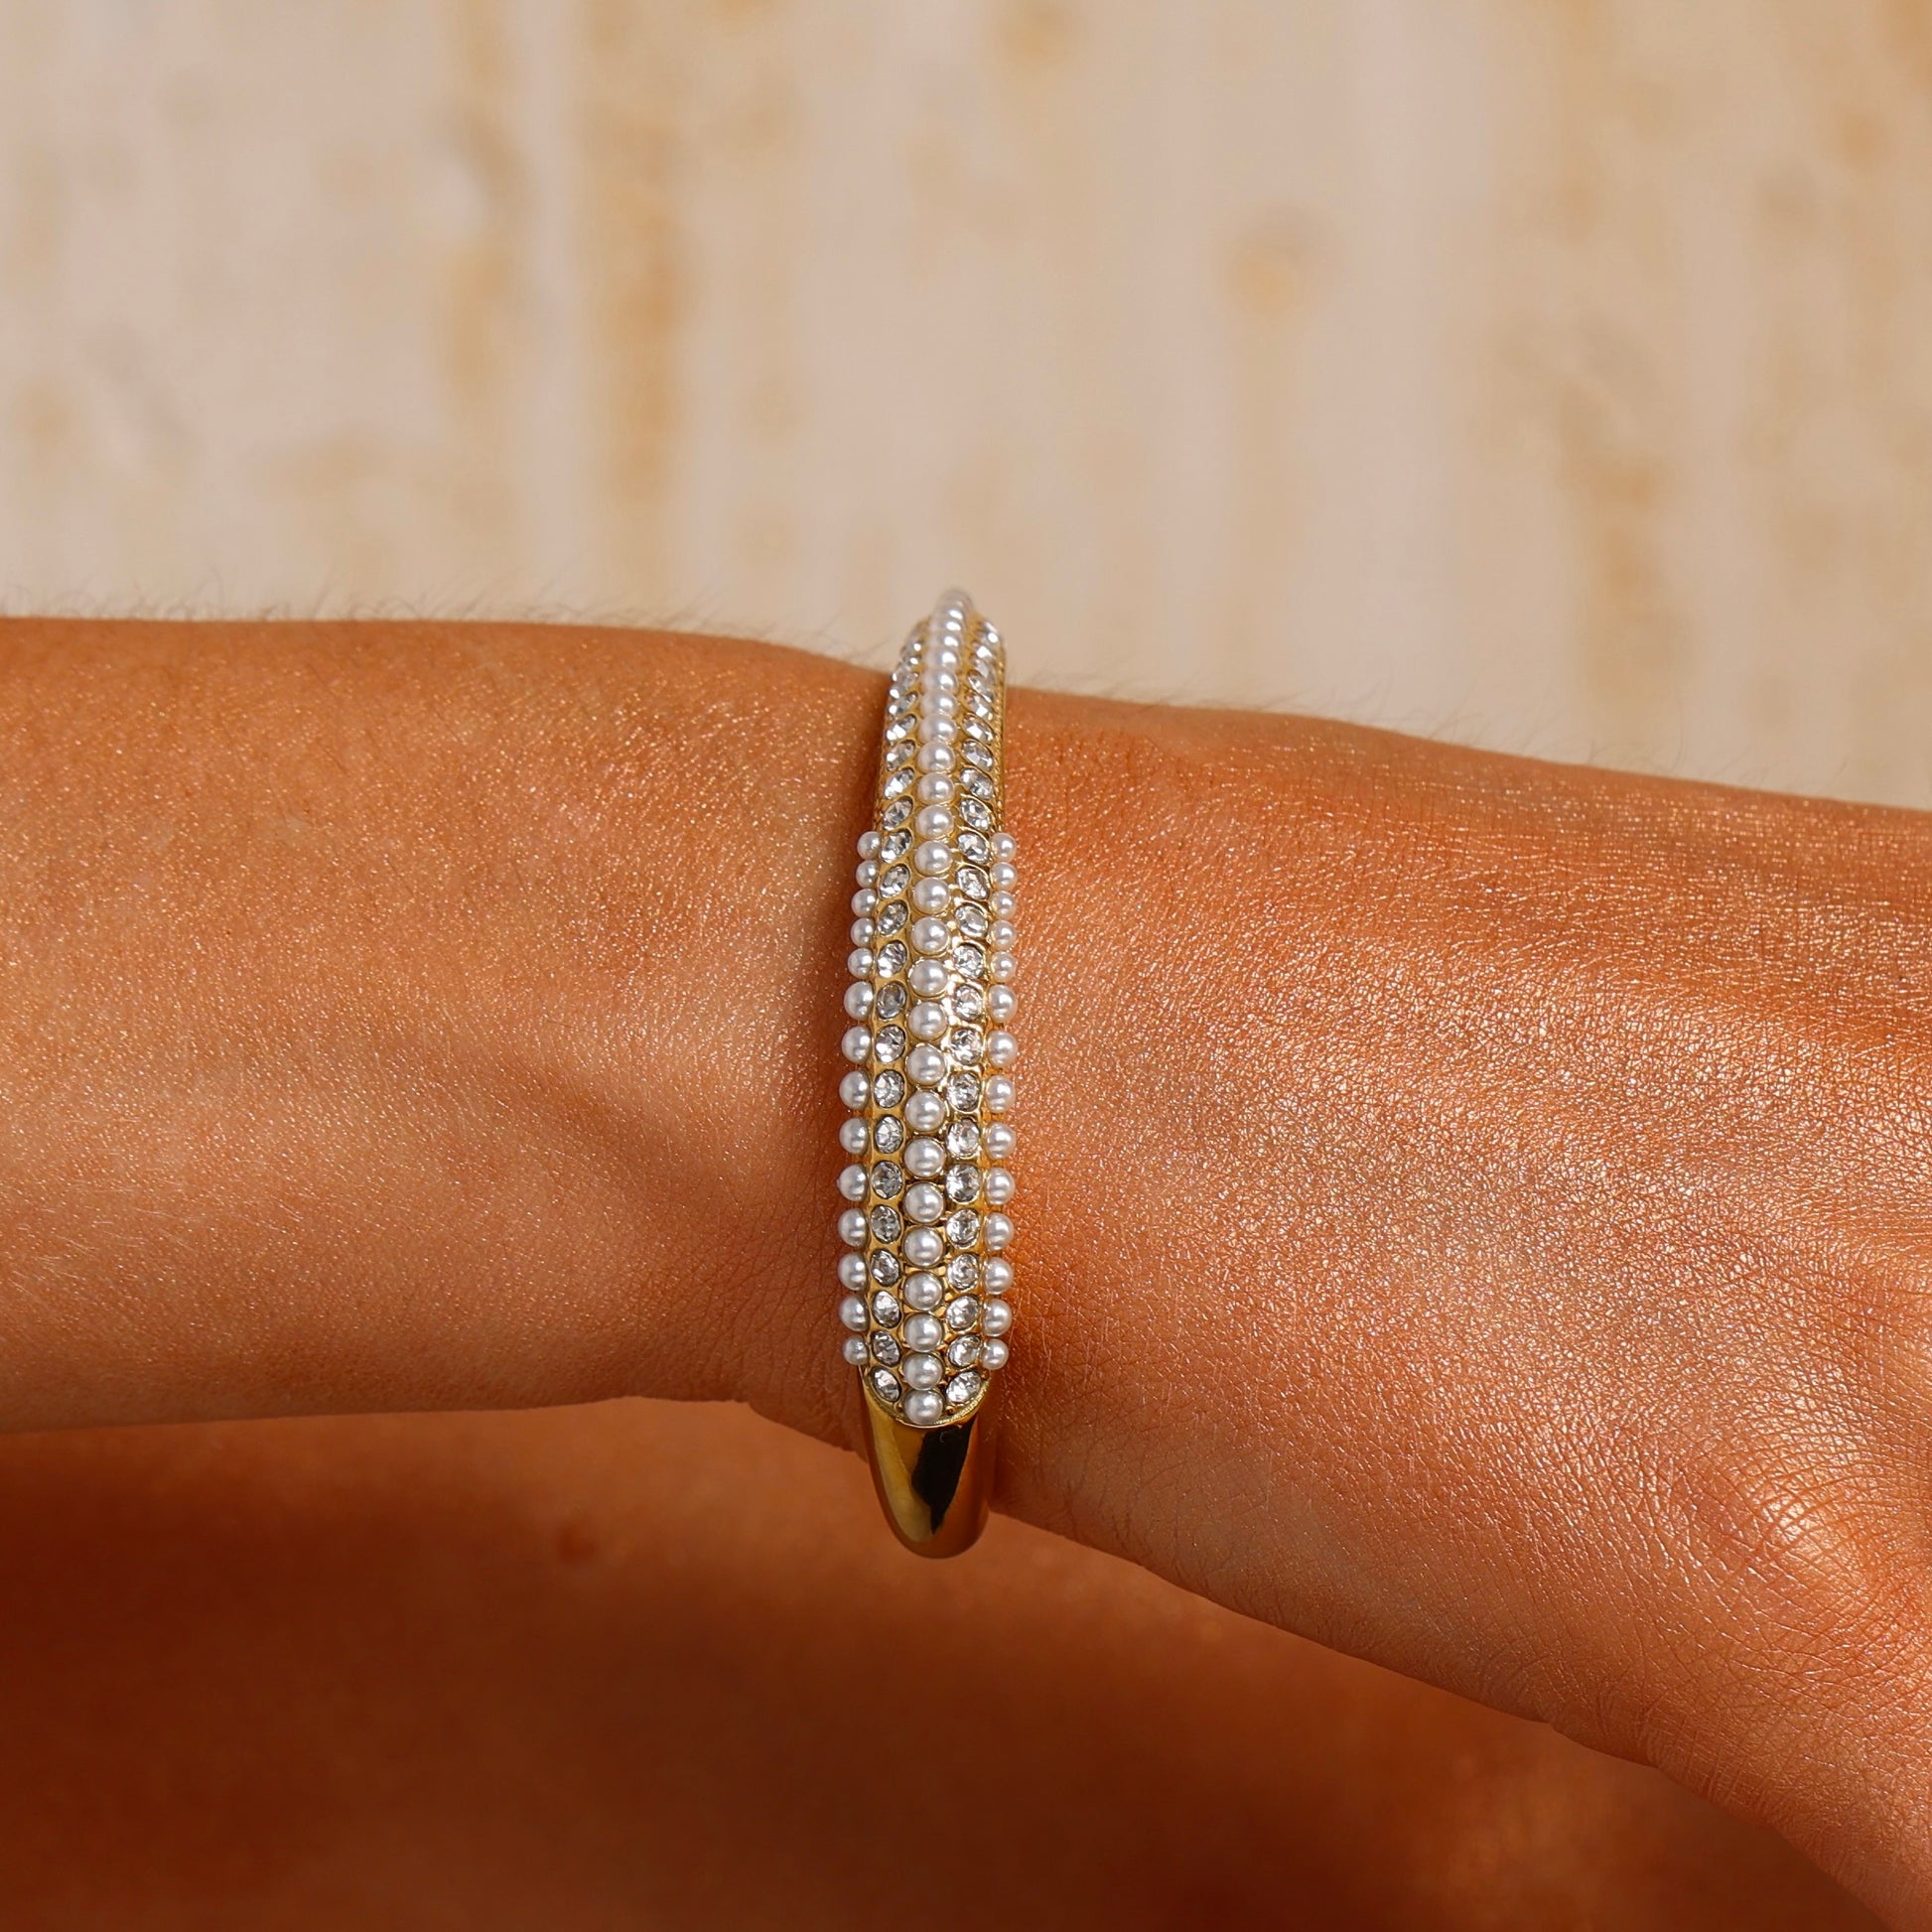 Cuff Bangle Inlaid with Pearls & CZ - 18K Gold Plated - Hypoallergenic - Bracelet - ONNNIII